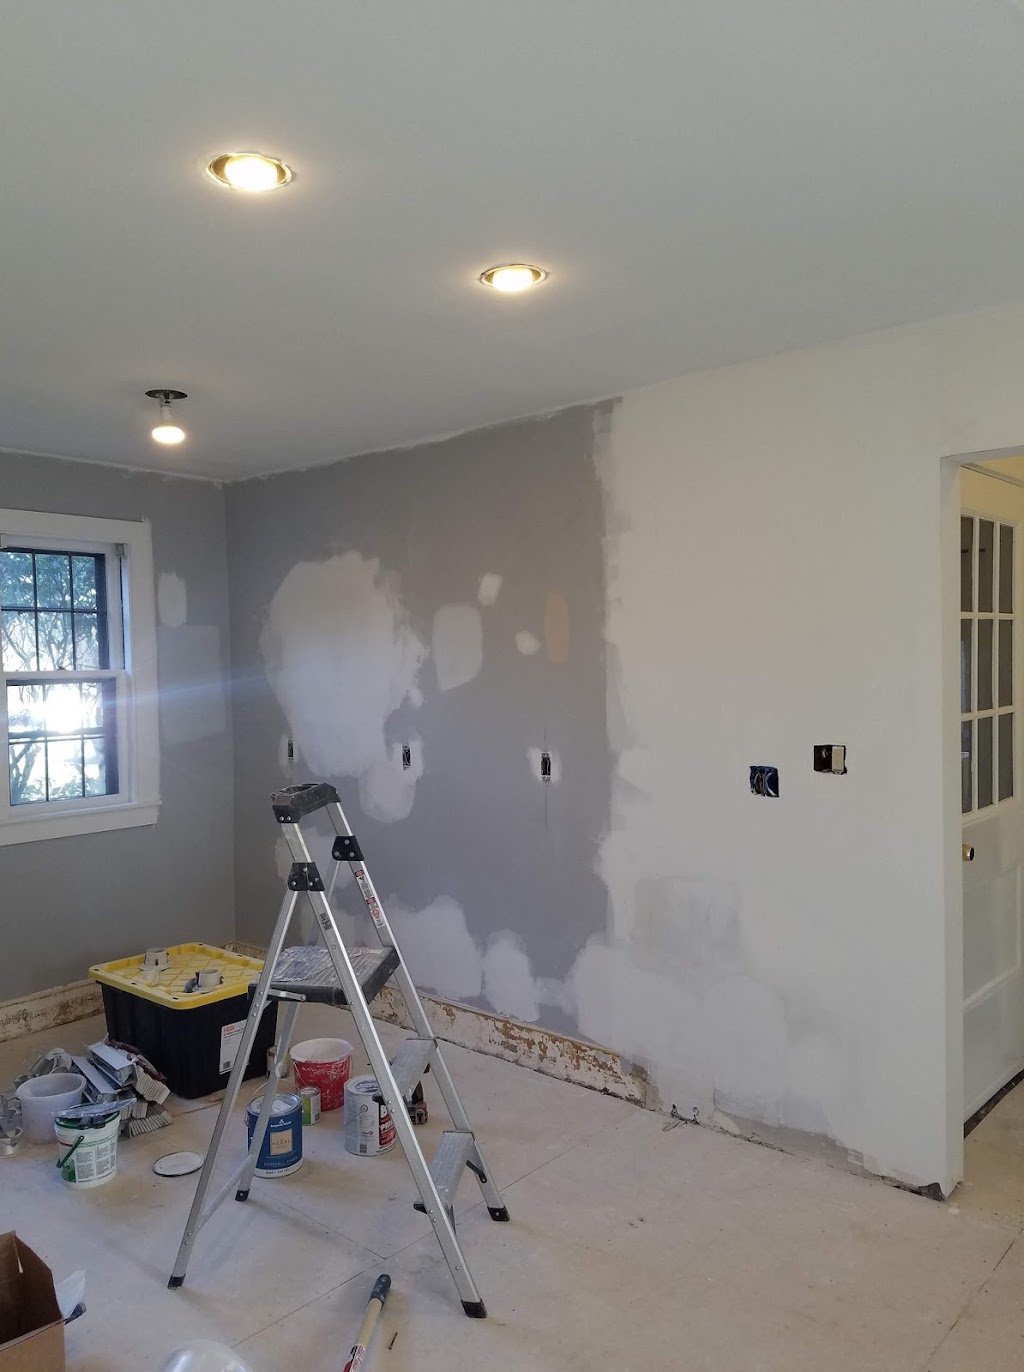 BEST QUALITY PAINTING SERVICES | 244 Groveland St, Haverhill, MA 01830, USA | Phone: (603) 948-8438